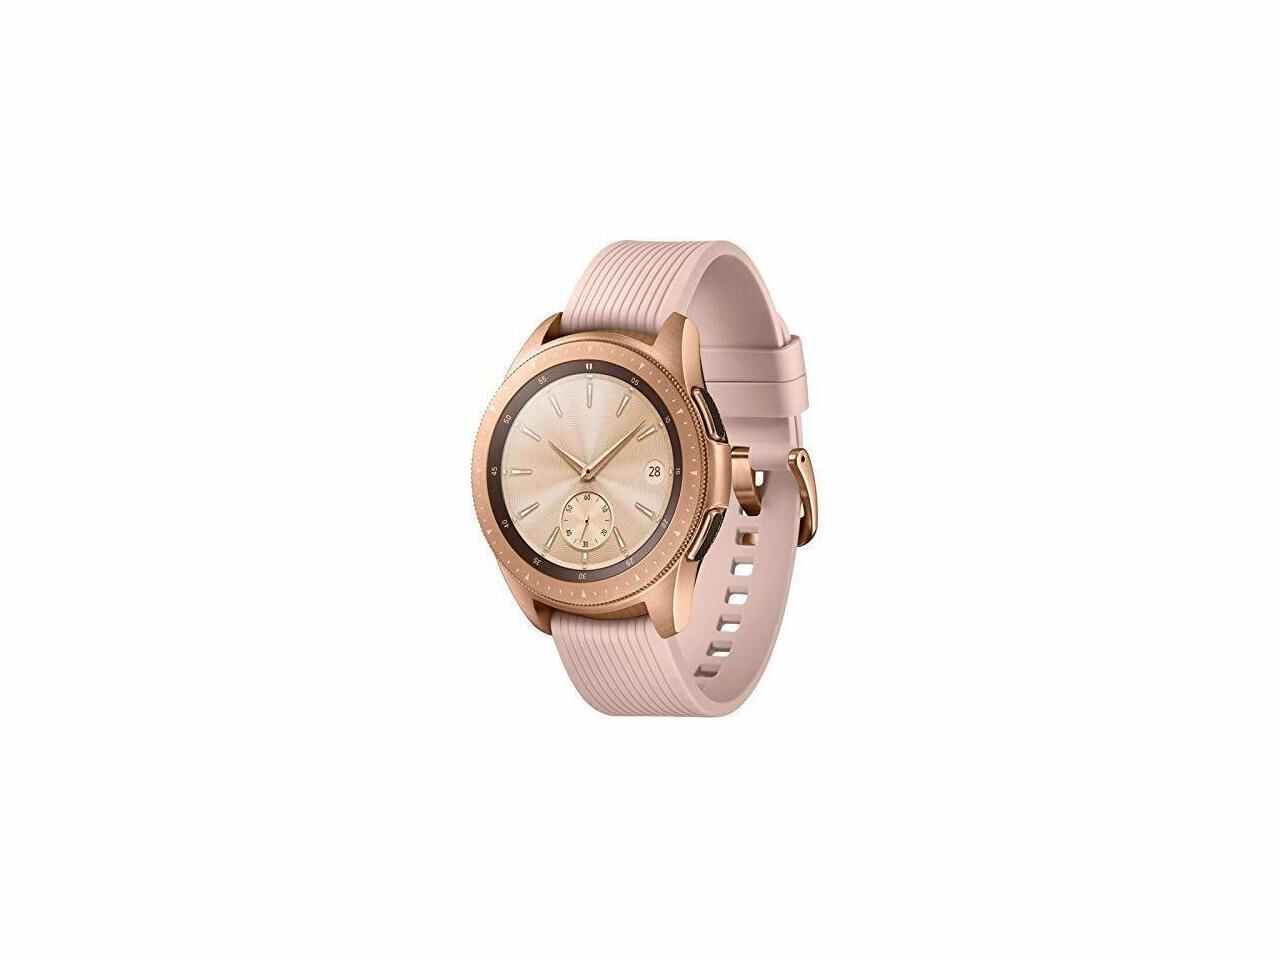 Samsung Galaxy Watch 42mm Smartwatch With Heart Rate - Rose Gold